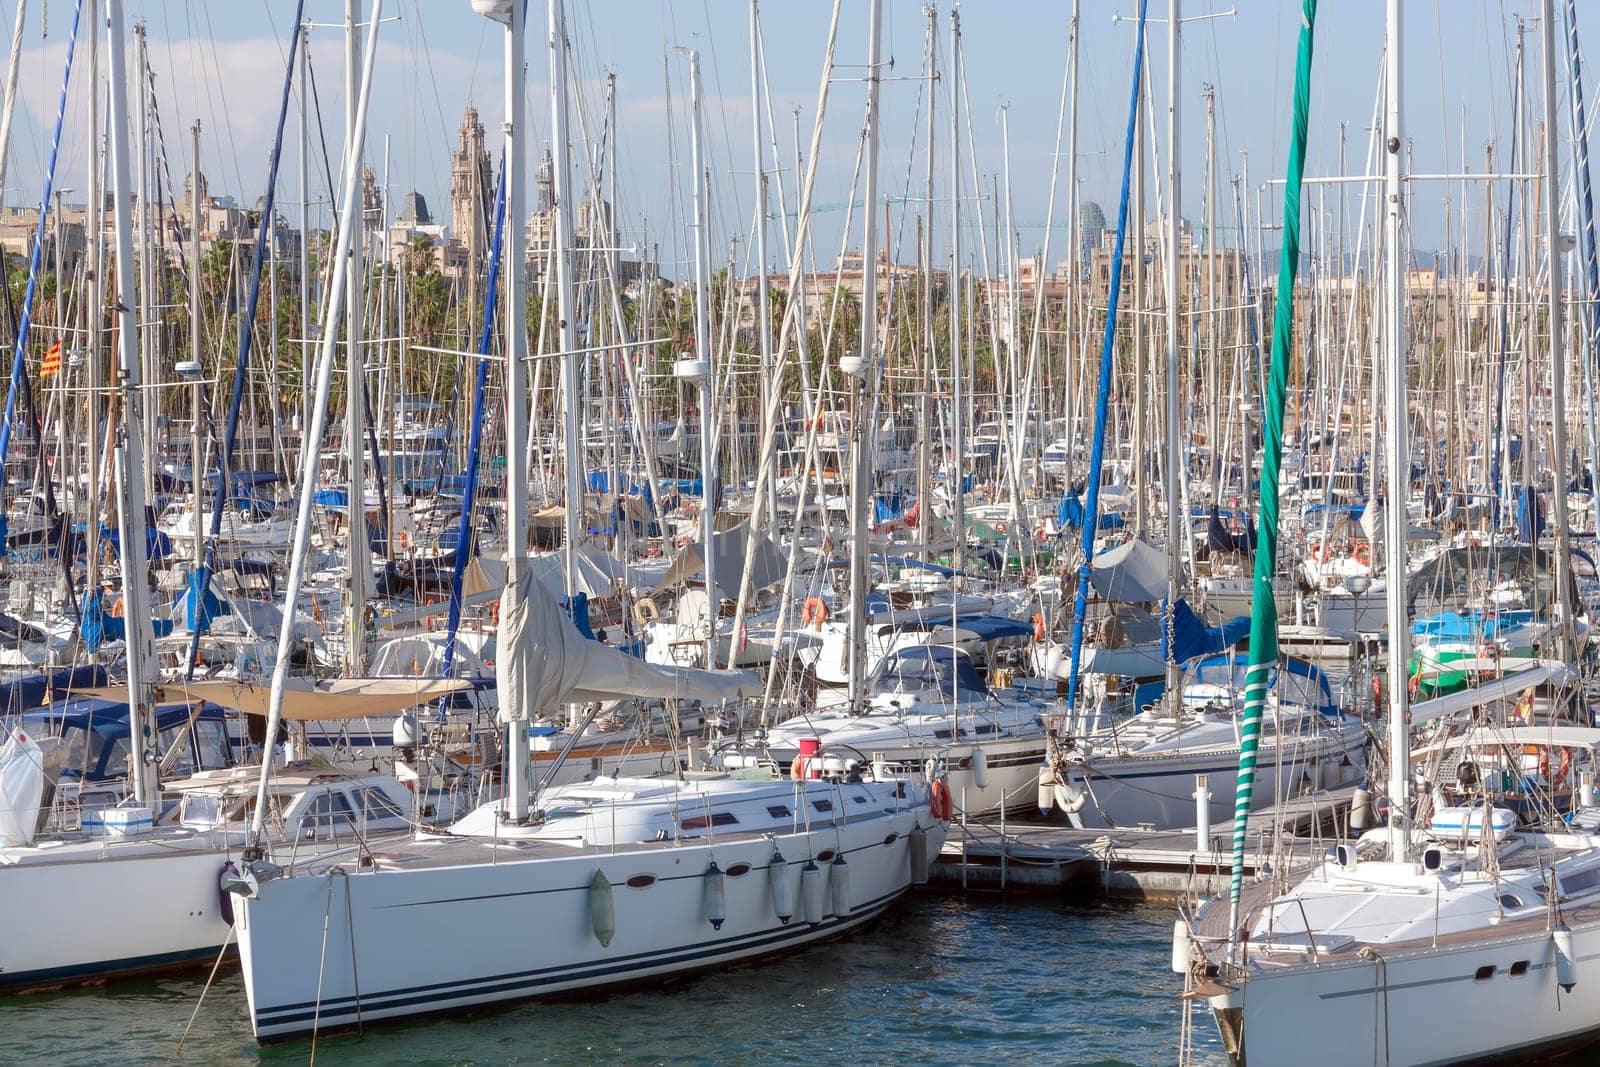 Yachts and boats in the Port of Barcelona by Nobilior